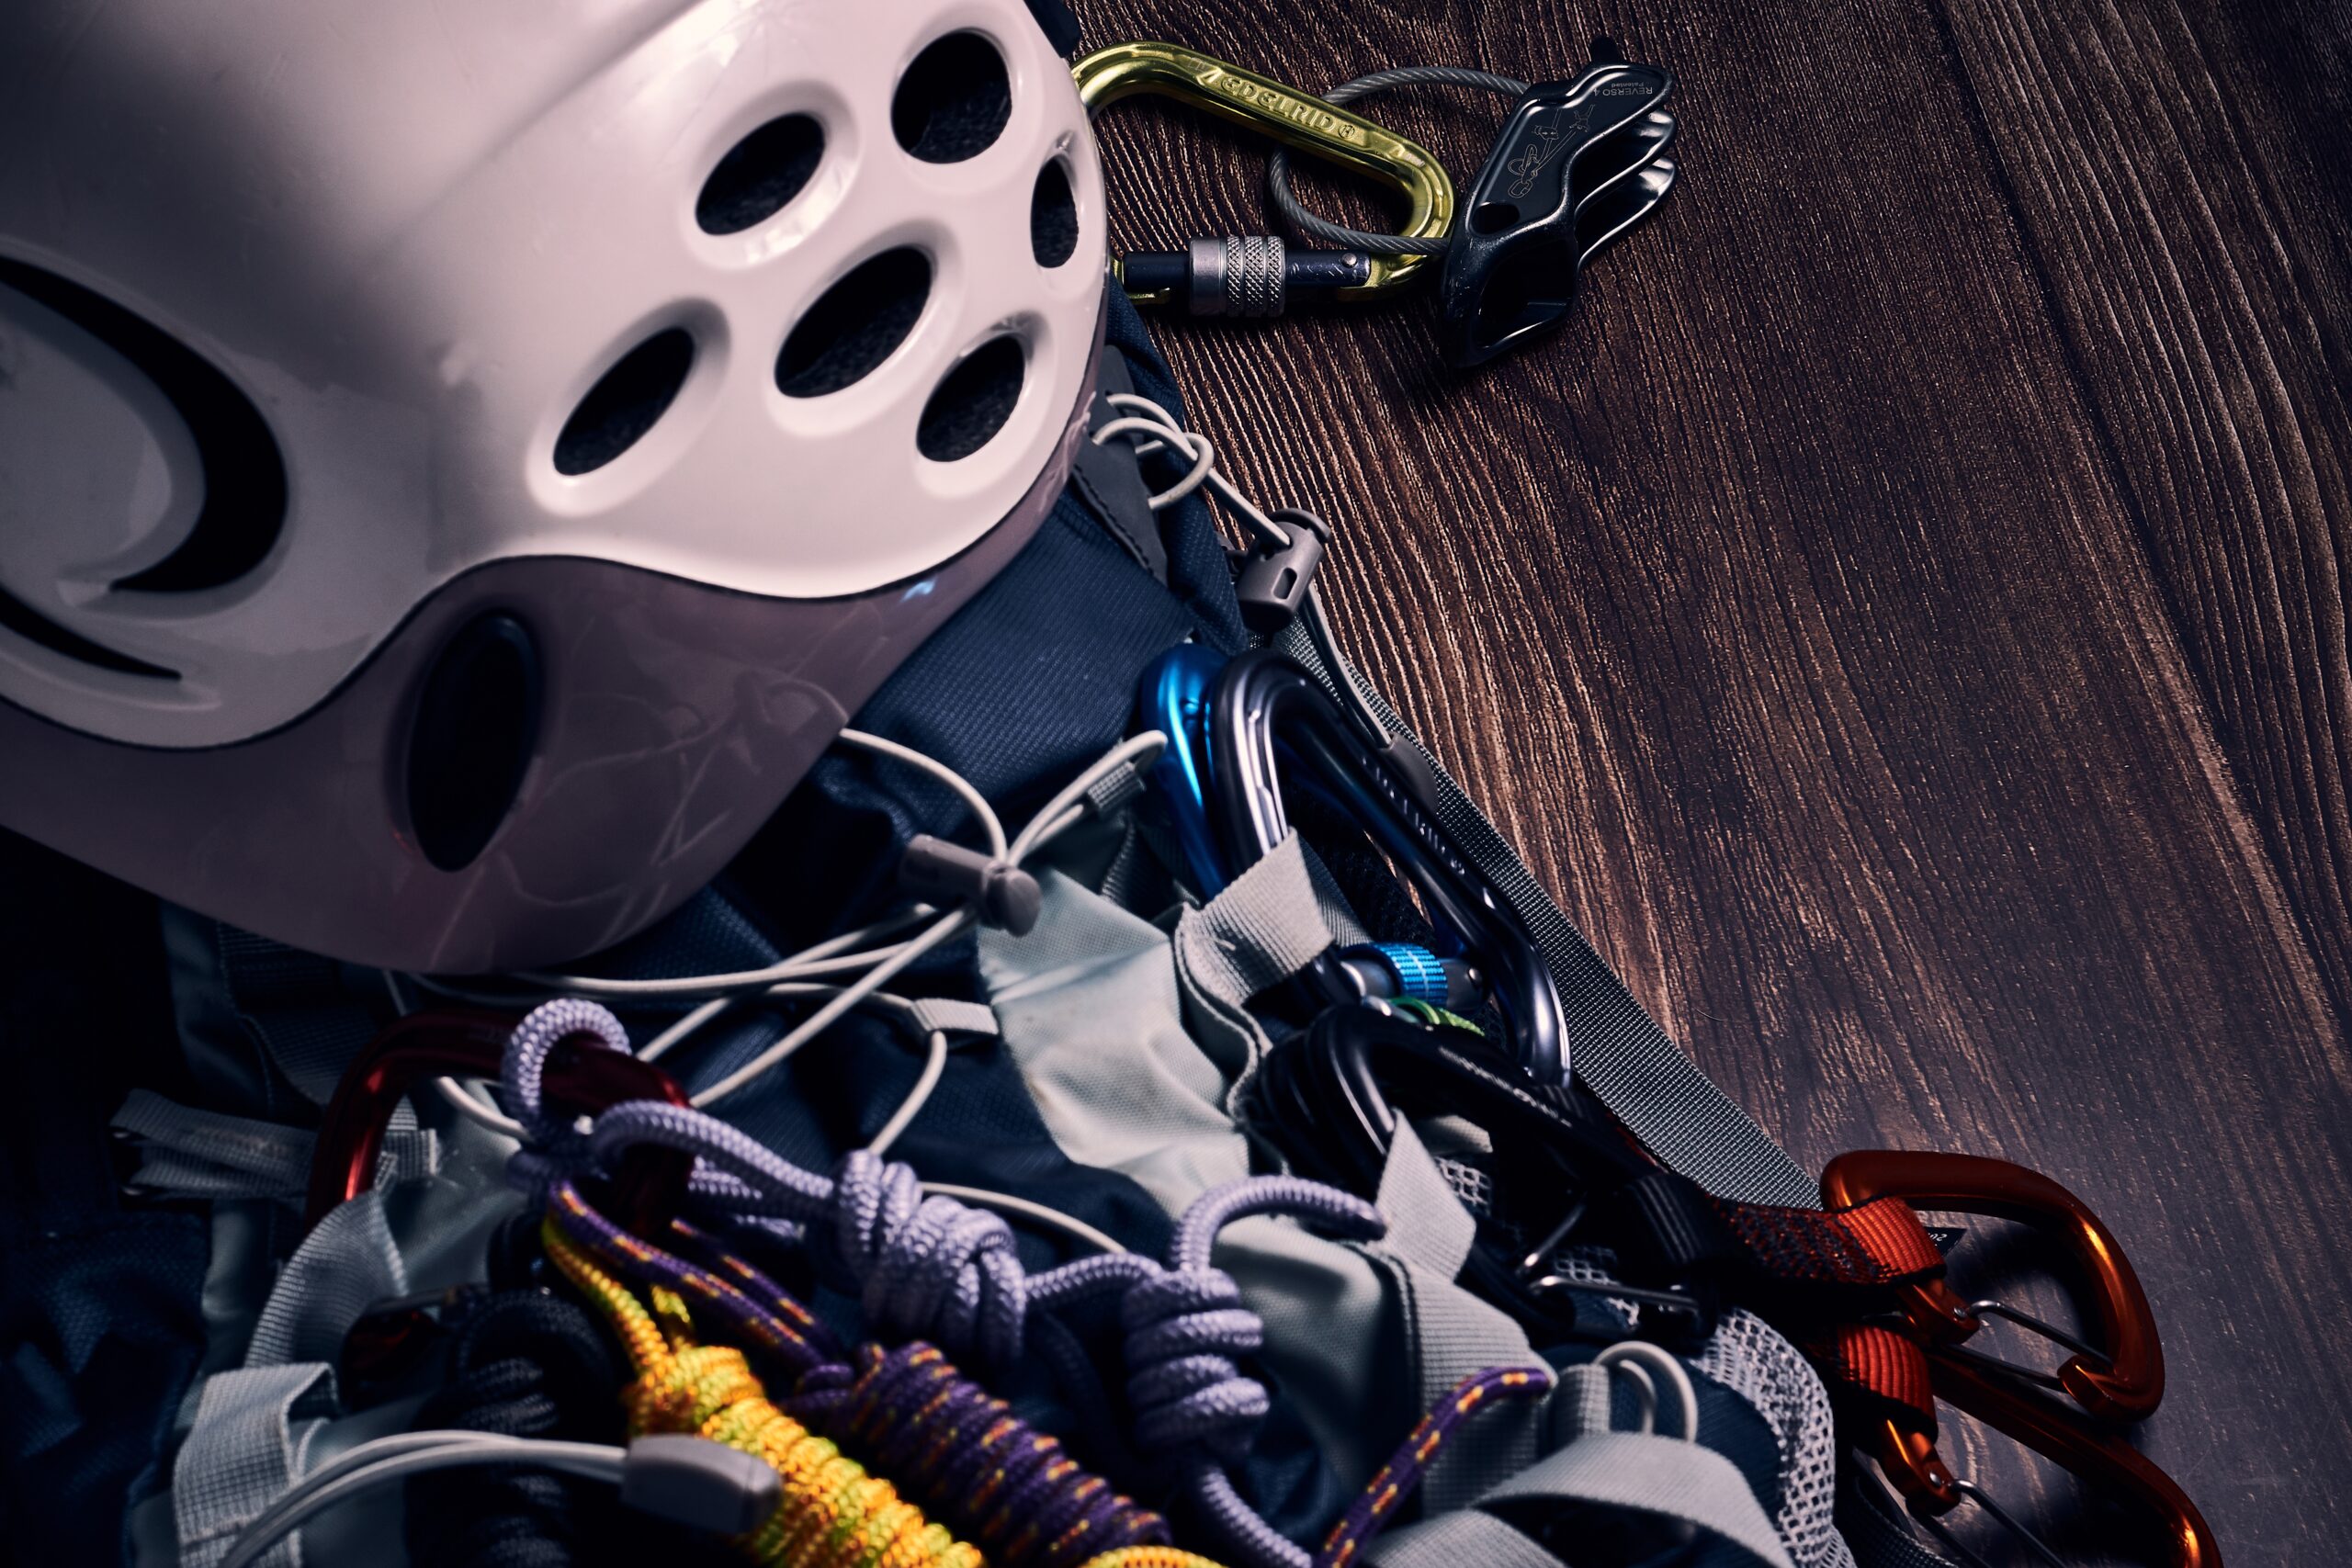 A collection of rappelling equipment, including a rope, harness, carabiners, rappel device, gloves, and helmet, laid out neatly on a flat surface.